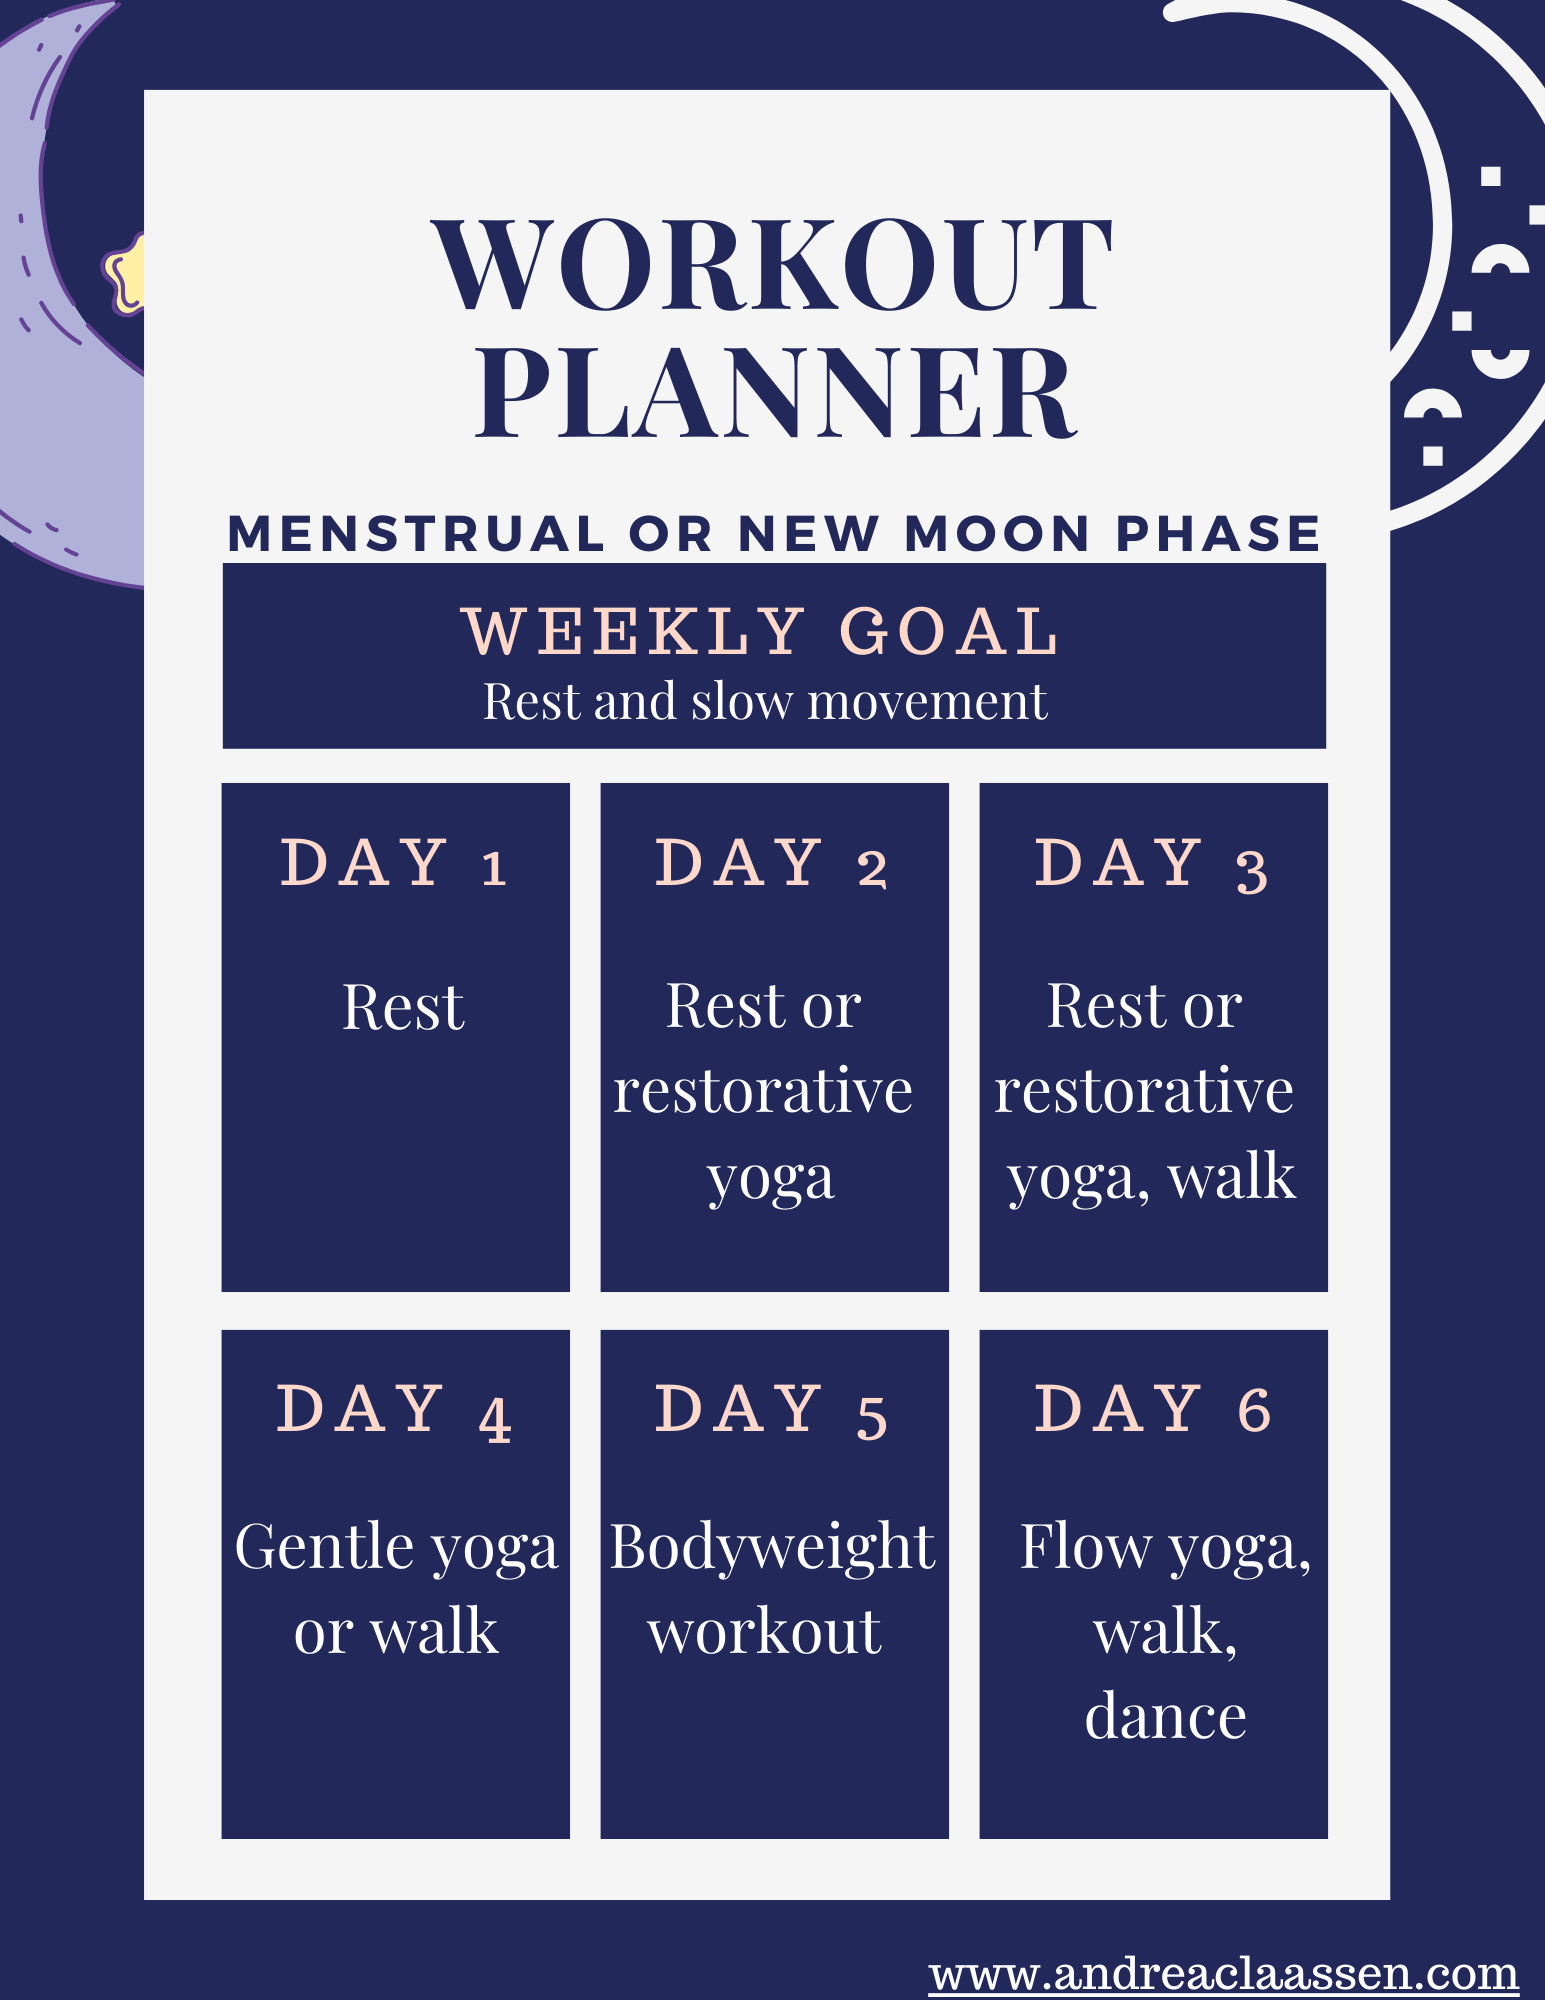 Menstrual or new moon phase